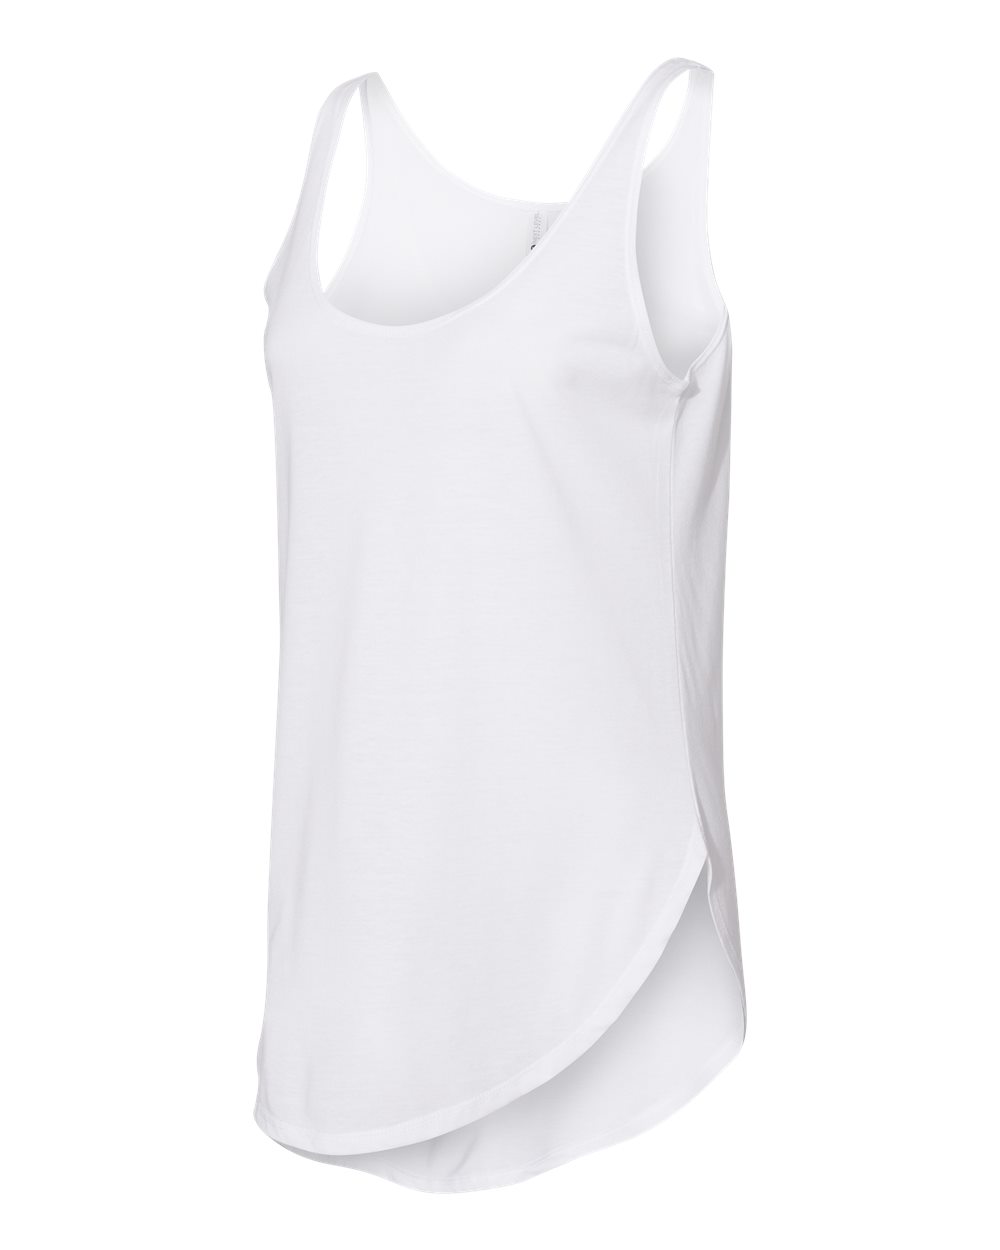 Get On My Level Shift Tank in Ivory • Impressions Online Boutique